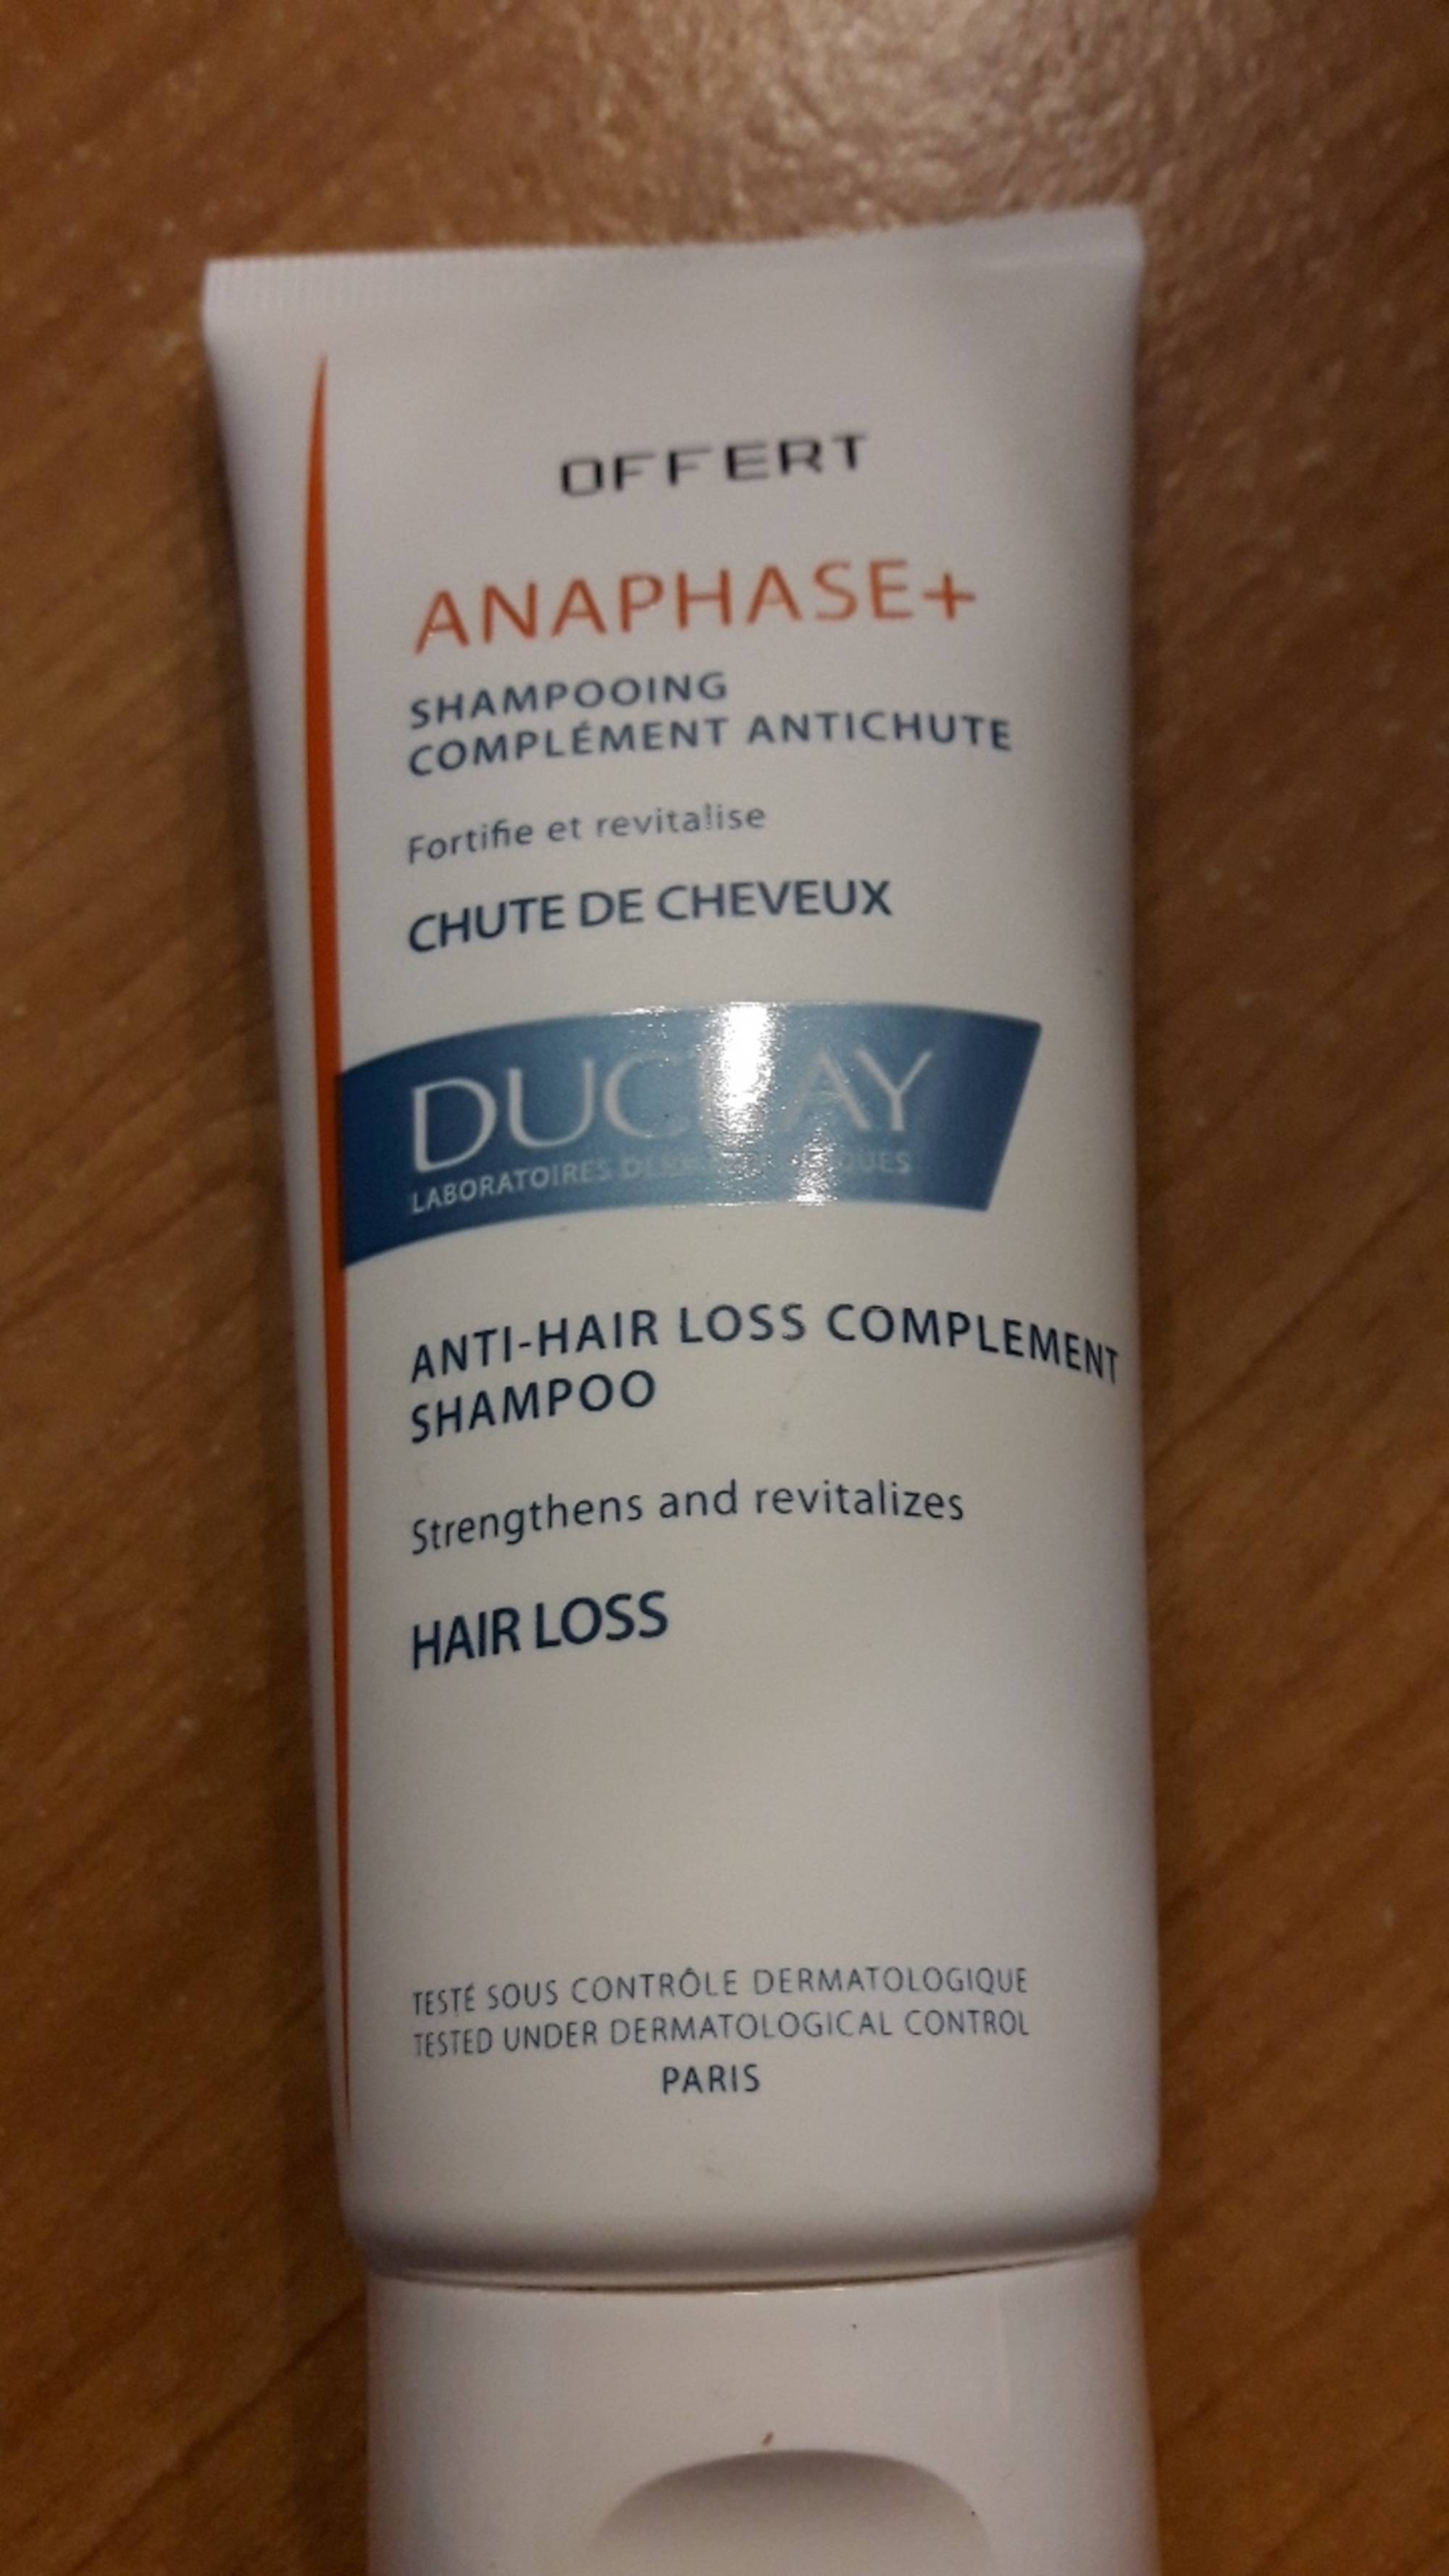 DUCRAY - Anaphase+ - Shampooing complement antichute